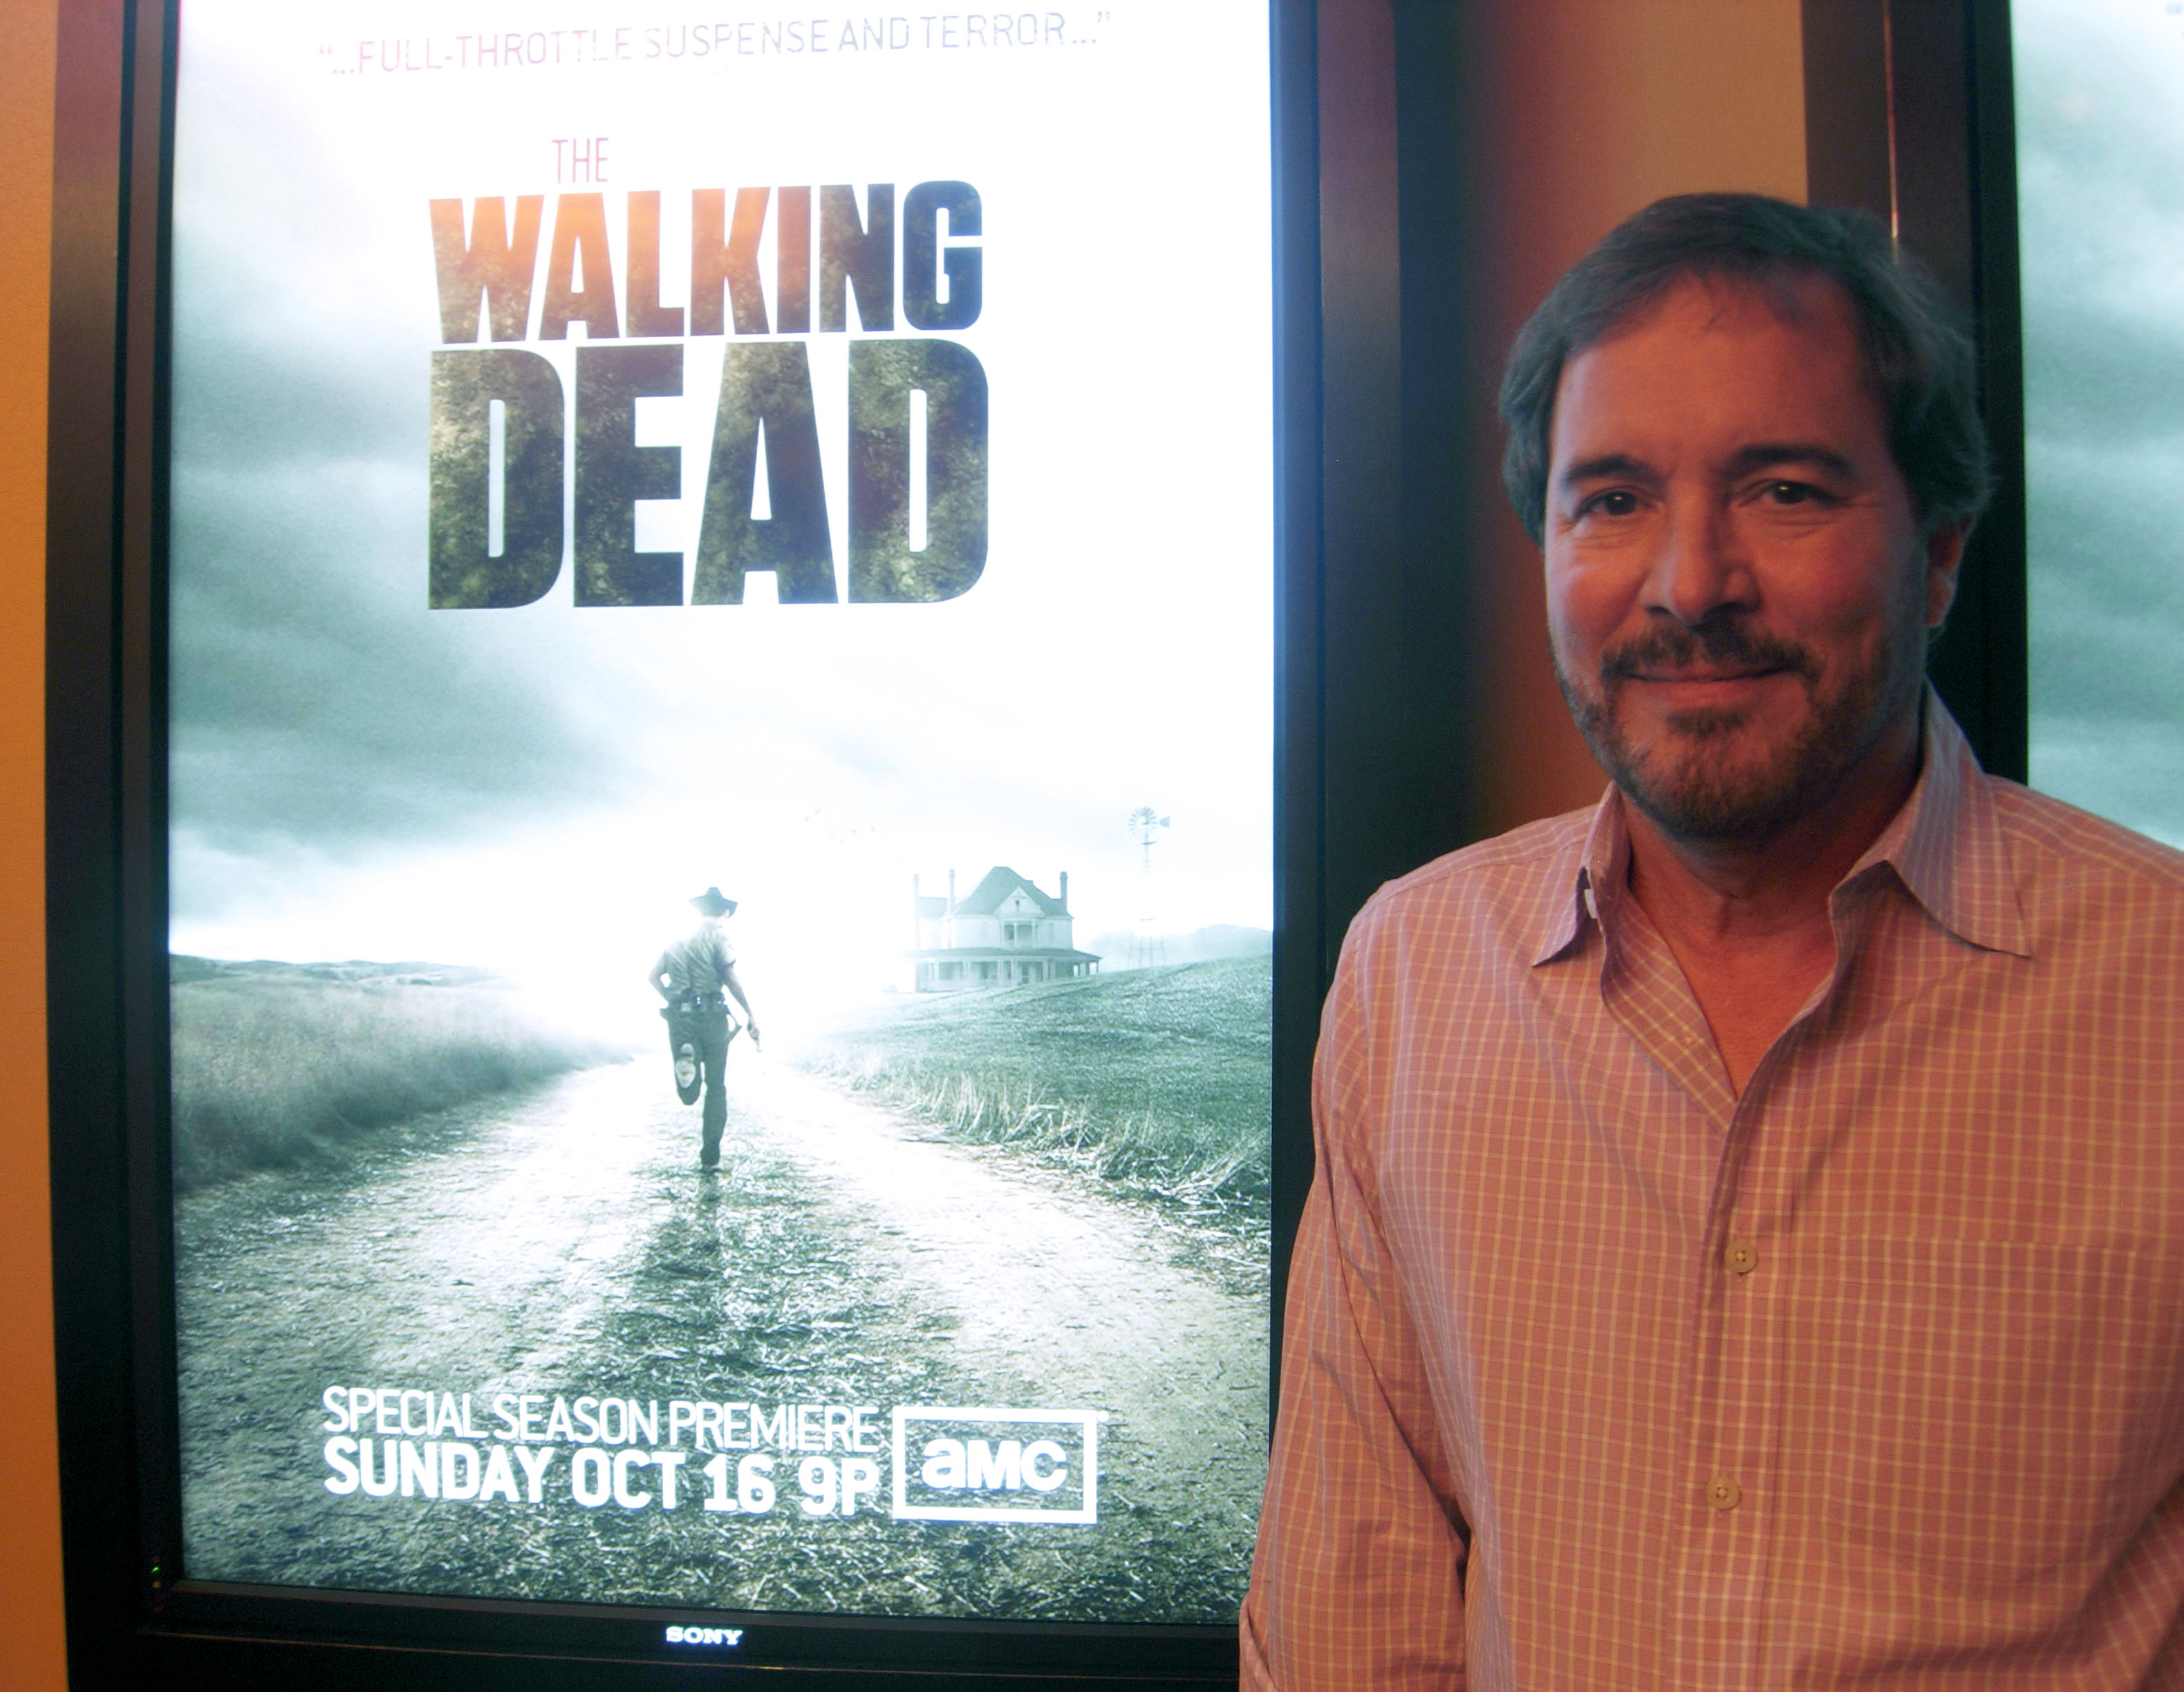 Manuel Espinosa at event of The Walking Dead